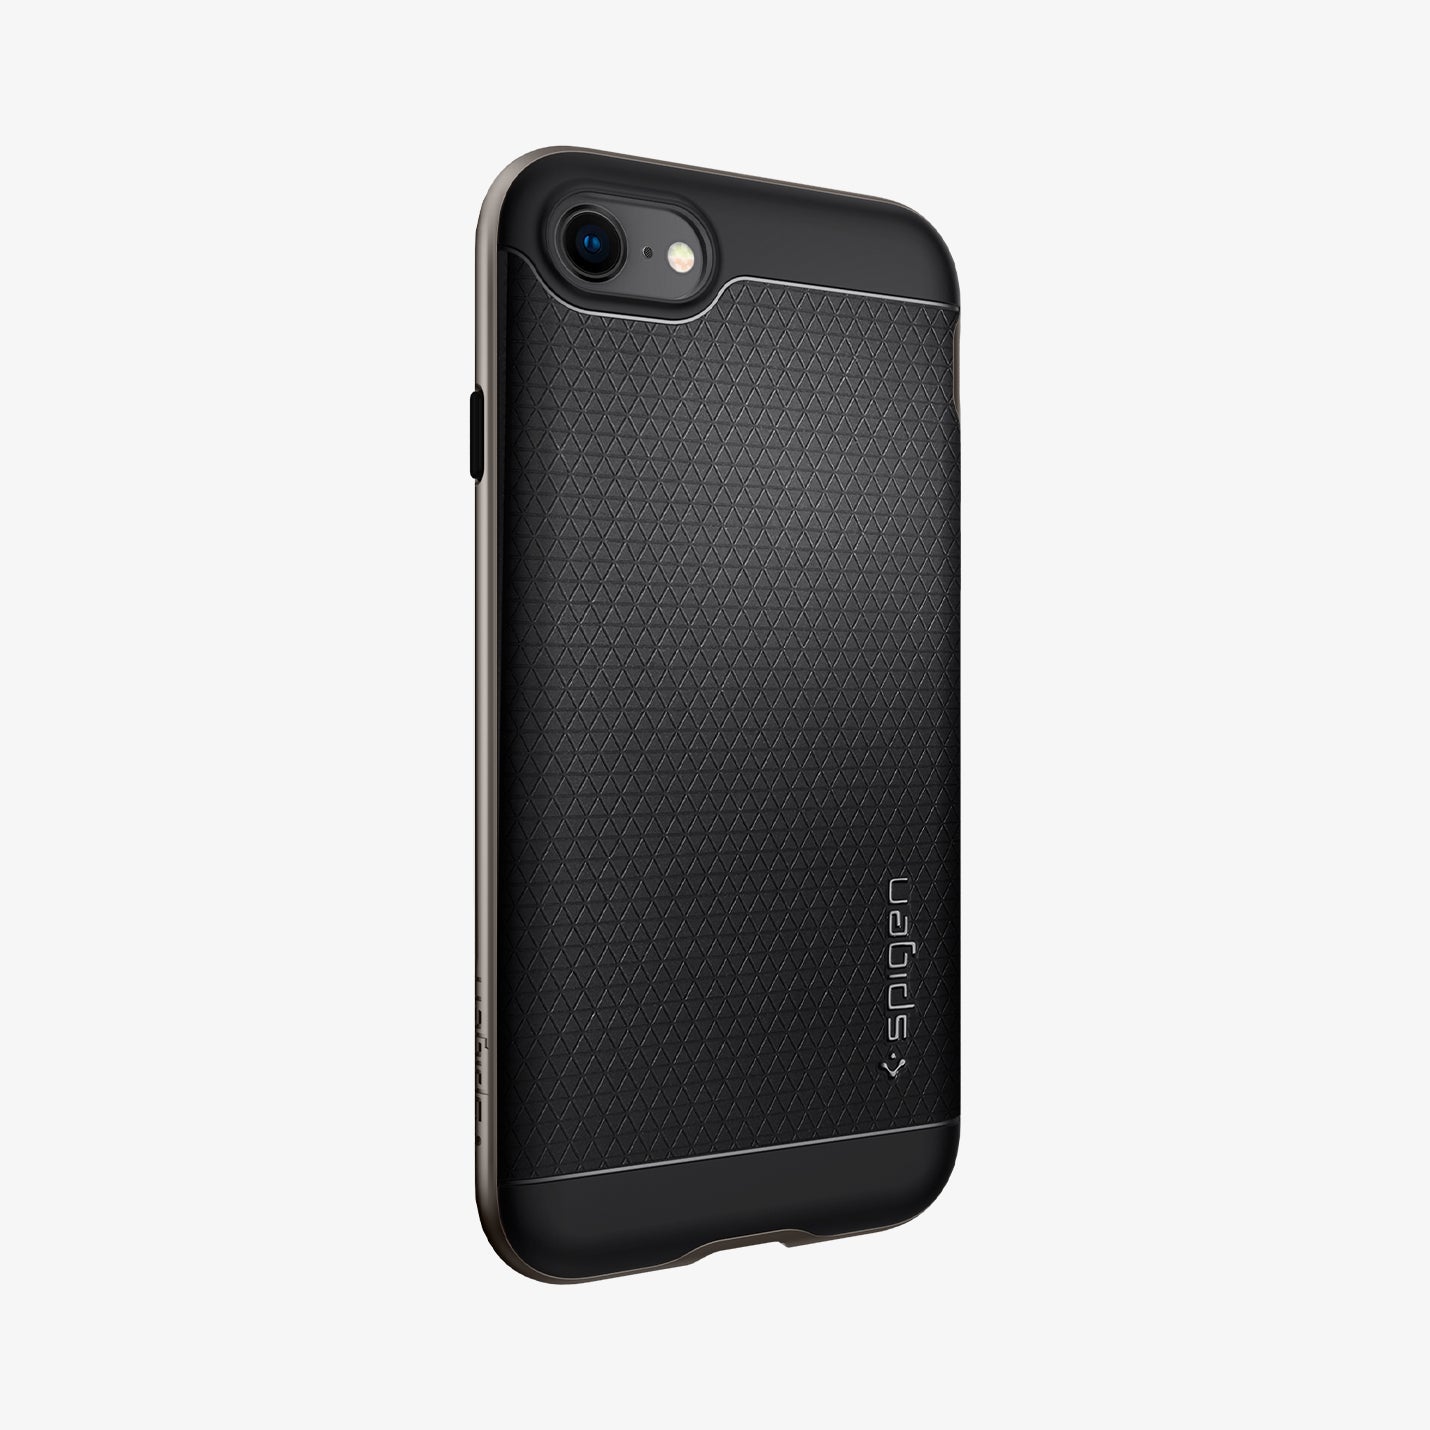 054CS22358 - iPhone SE Neo Hybrid case in gunmetal showing the back